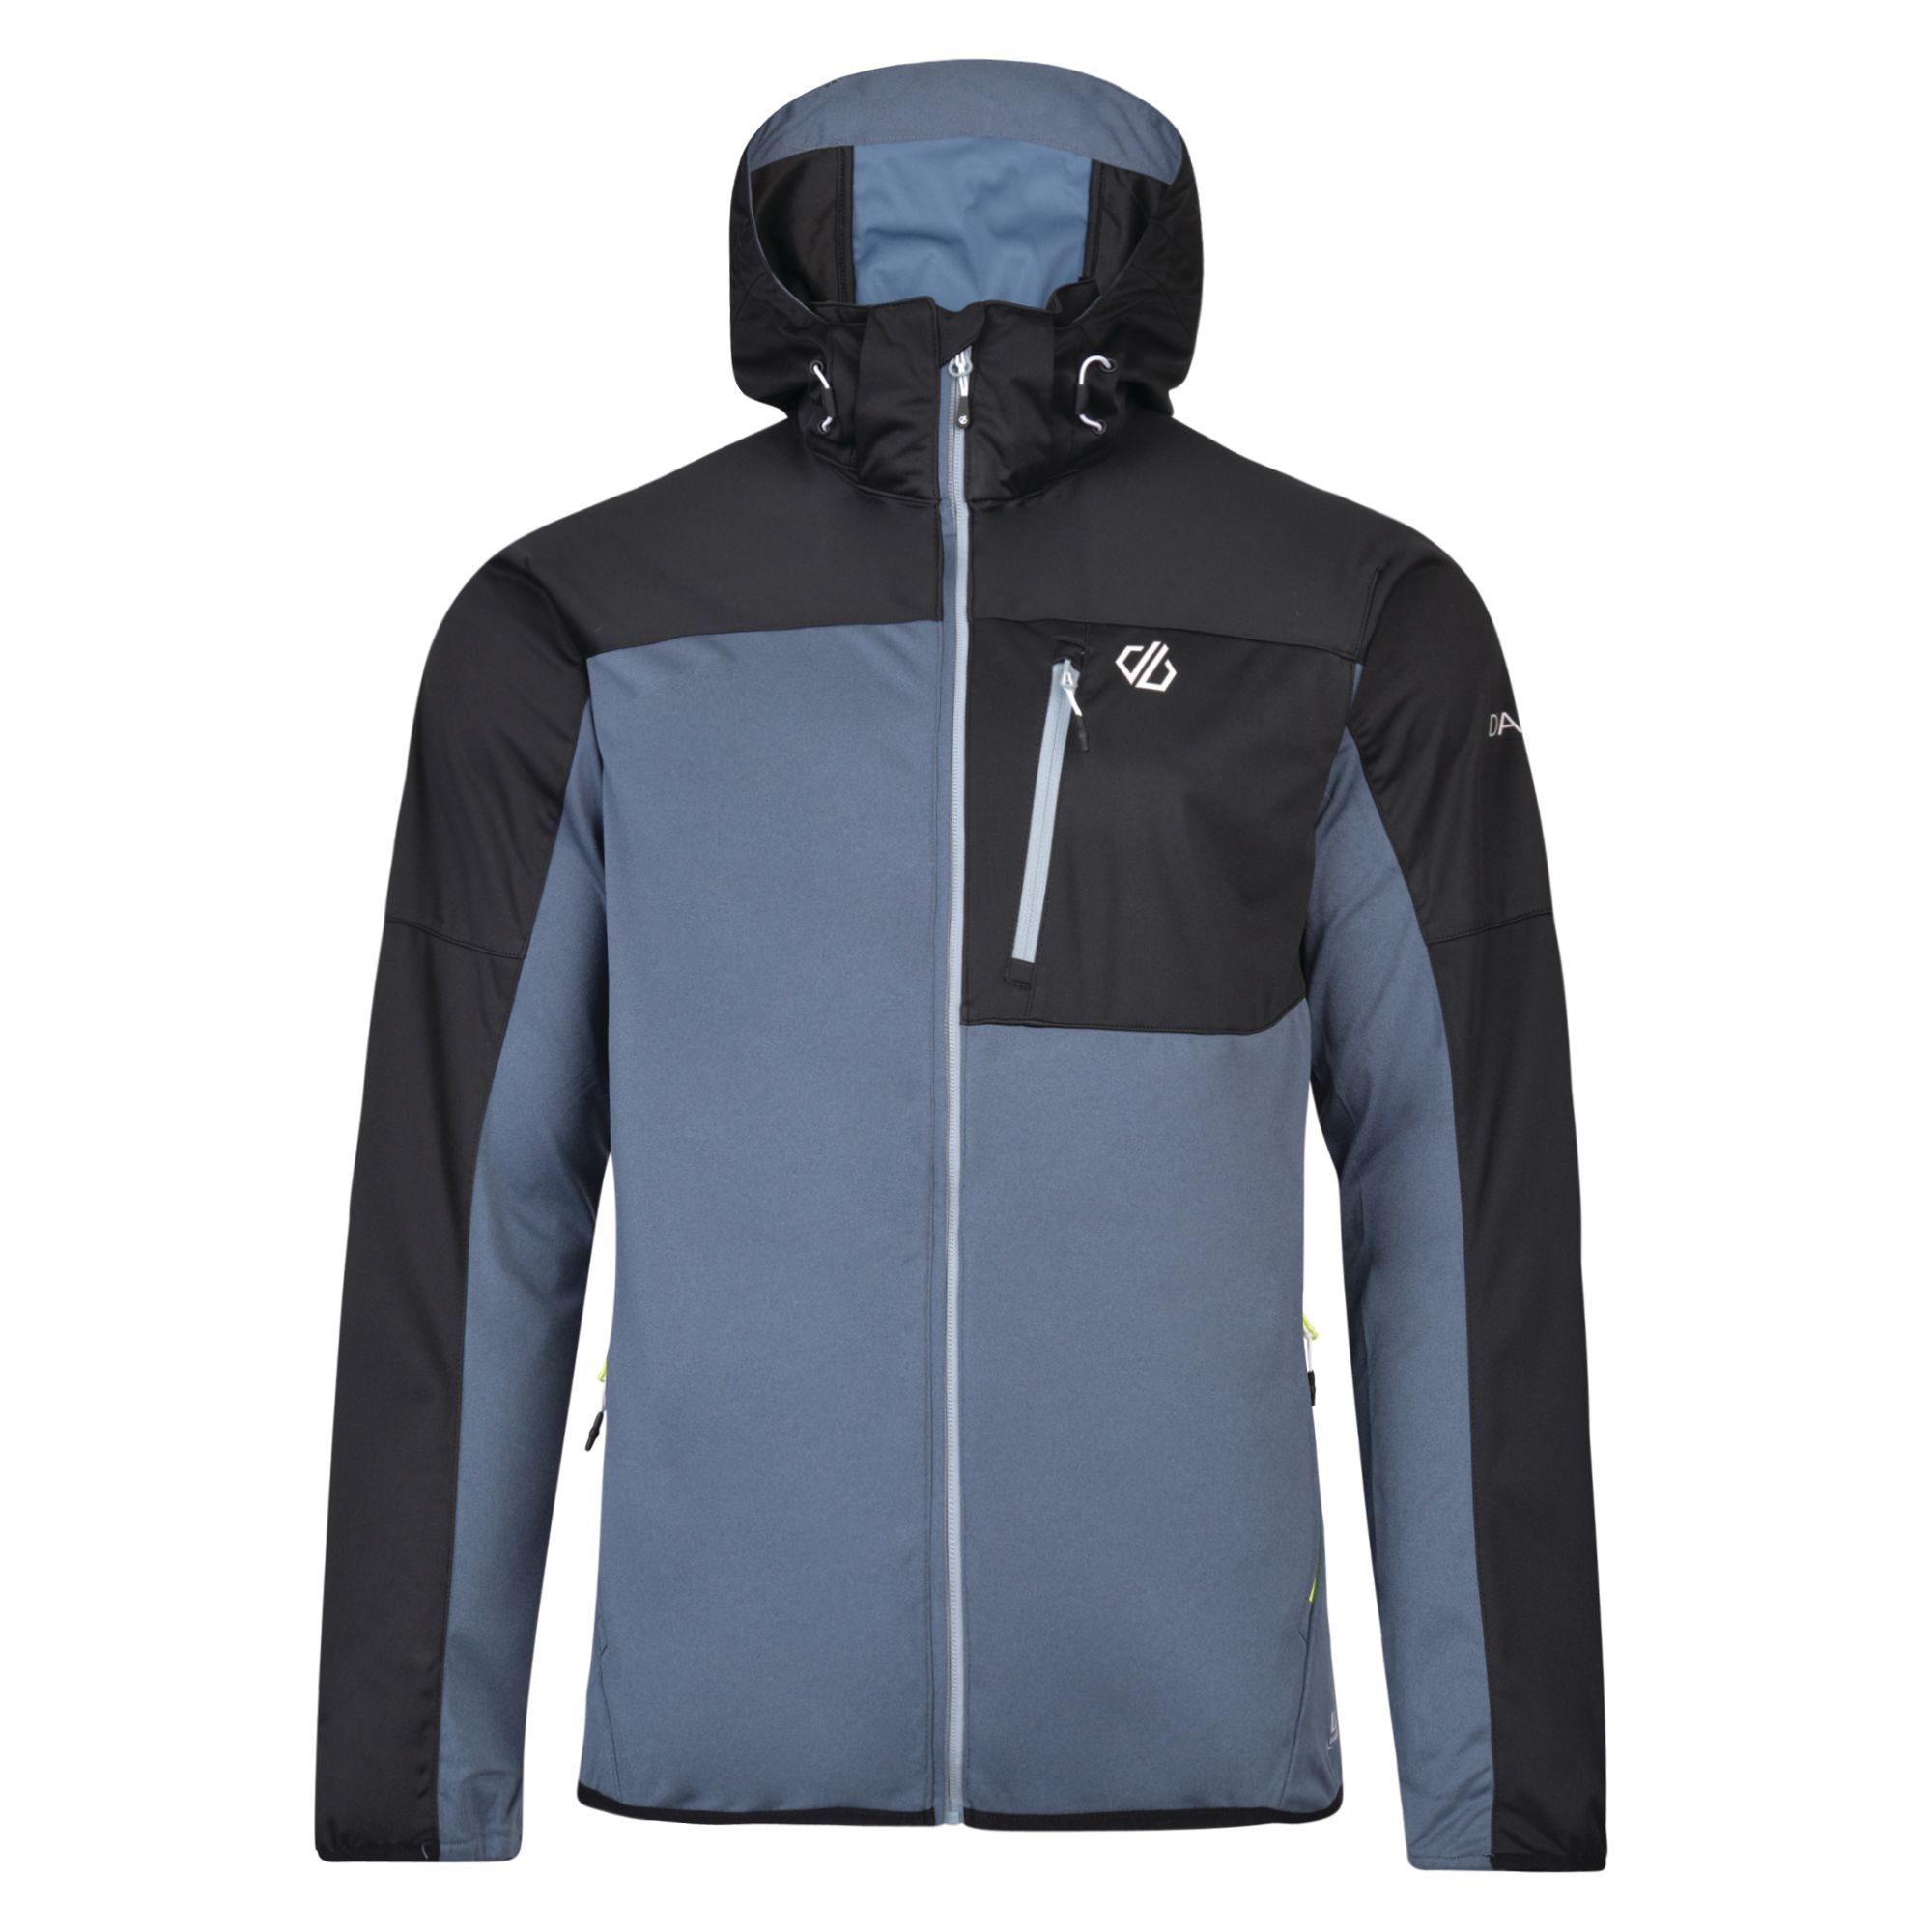 100% polyester. Ilus D-Lab woven stretch polyester softshell fabric. AEP Kinematics. SeamSmart Technology. Waterproof up to 5,000mm/ Breathability rating 5,000/m2/24hrs. Detachable performance fit technical hood with adjusters. Underarm ventilation zips. Articulated sleeves for enhanced range of movement. Stretch binding to cuffs and hem. 1 x zipped chest pocket and 2 x zipped lower pockets. Headphone port to inner pocket bag.